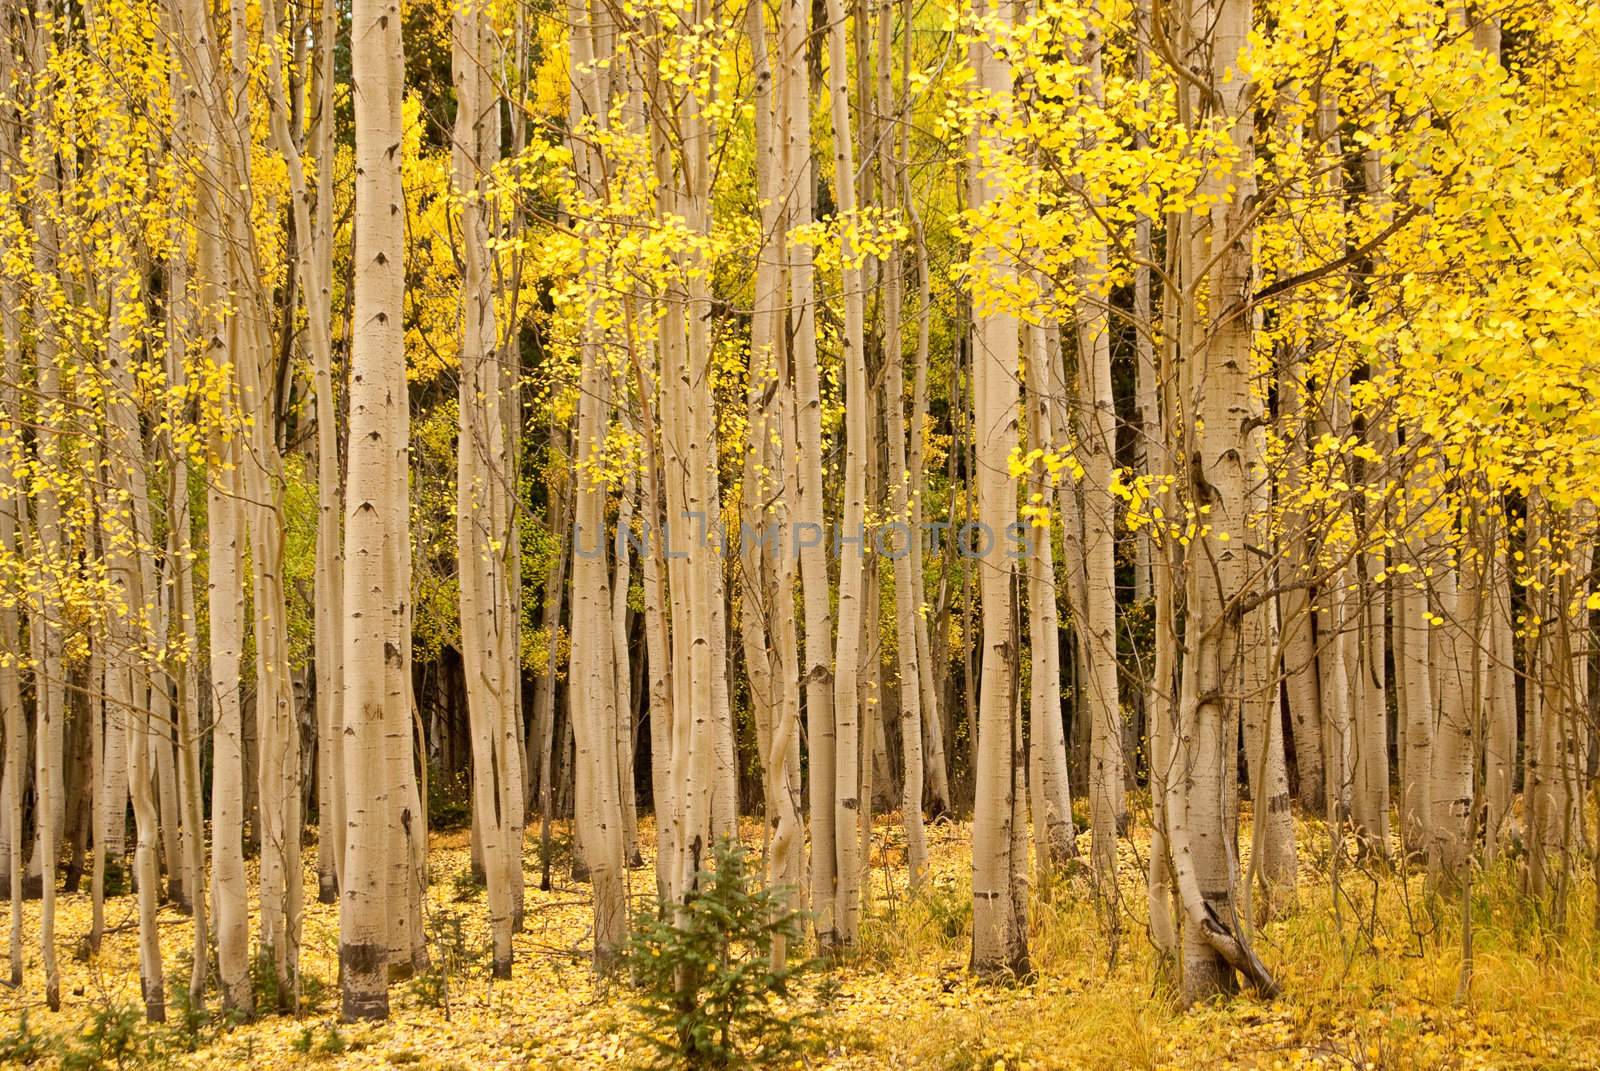 Stand of golden aspens in Ouray Colorado